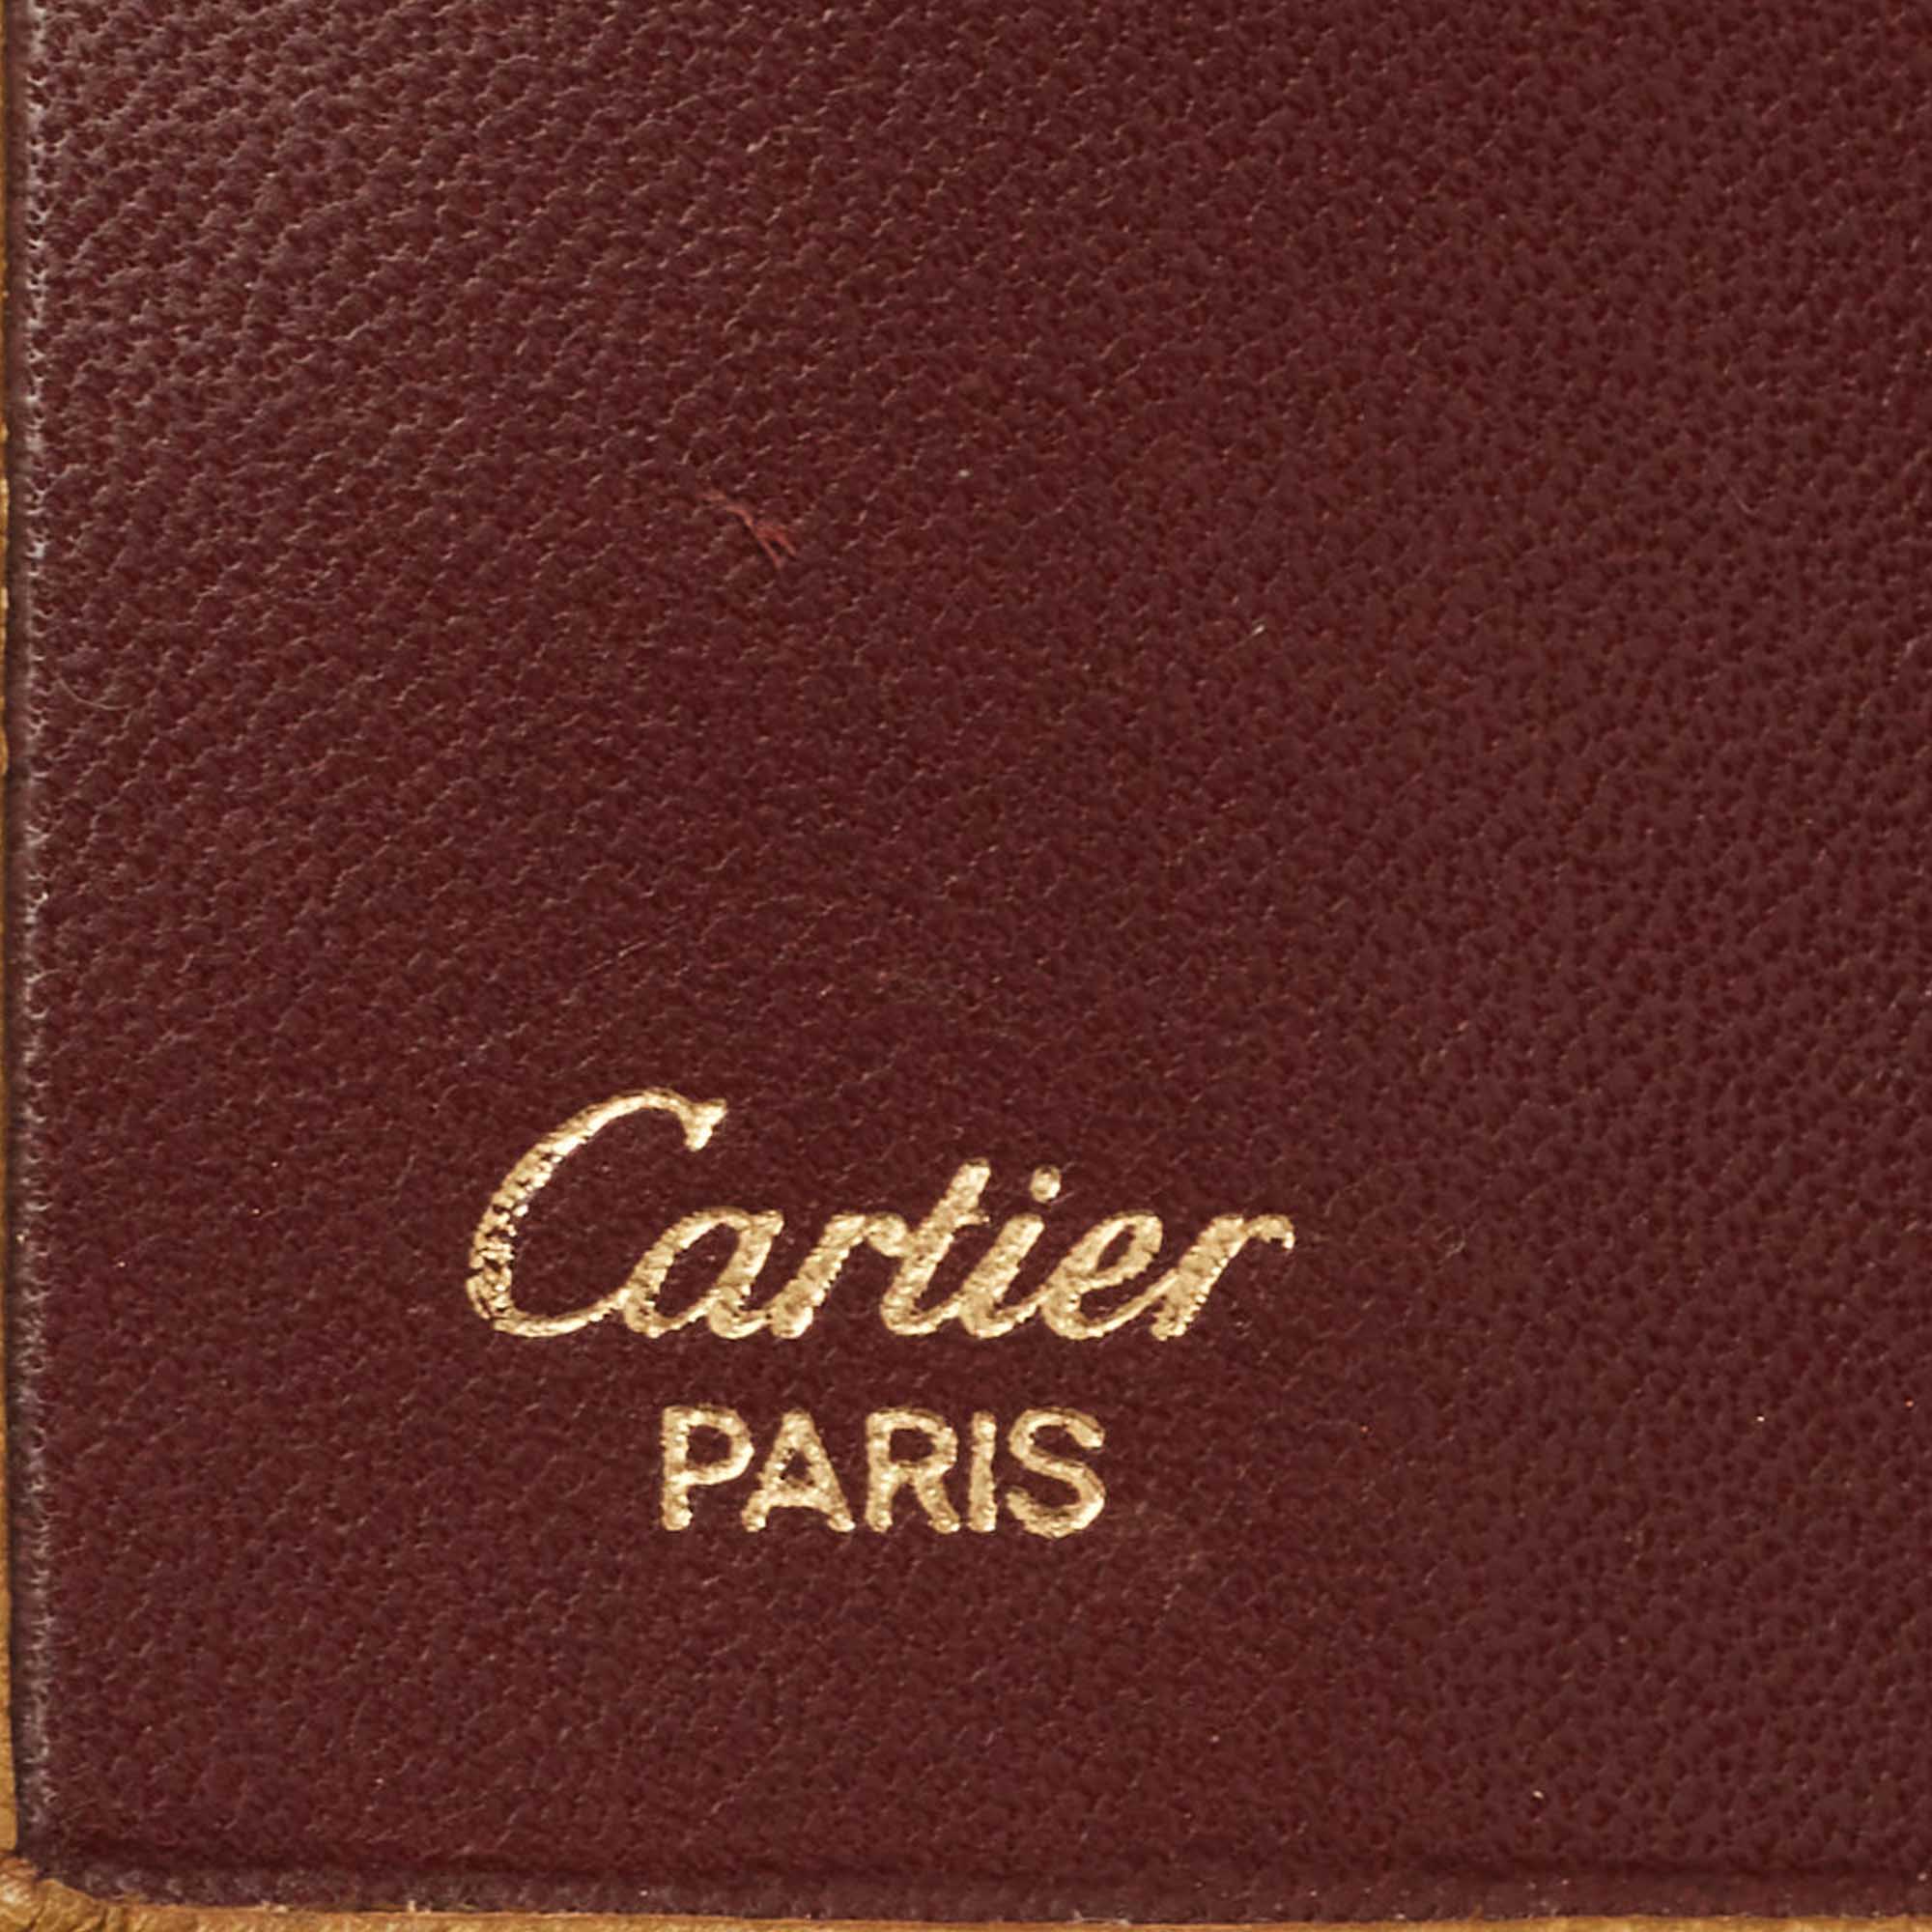 Cartier Tan Leather 4 Key Holder